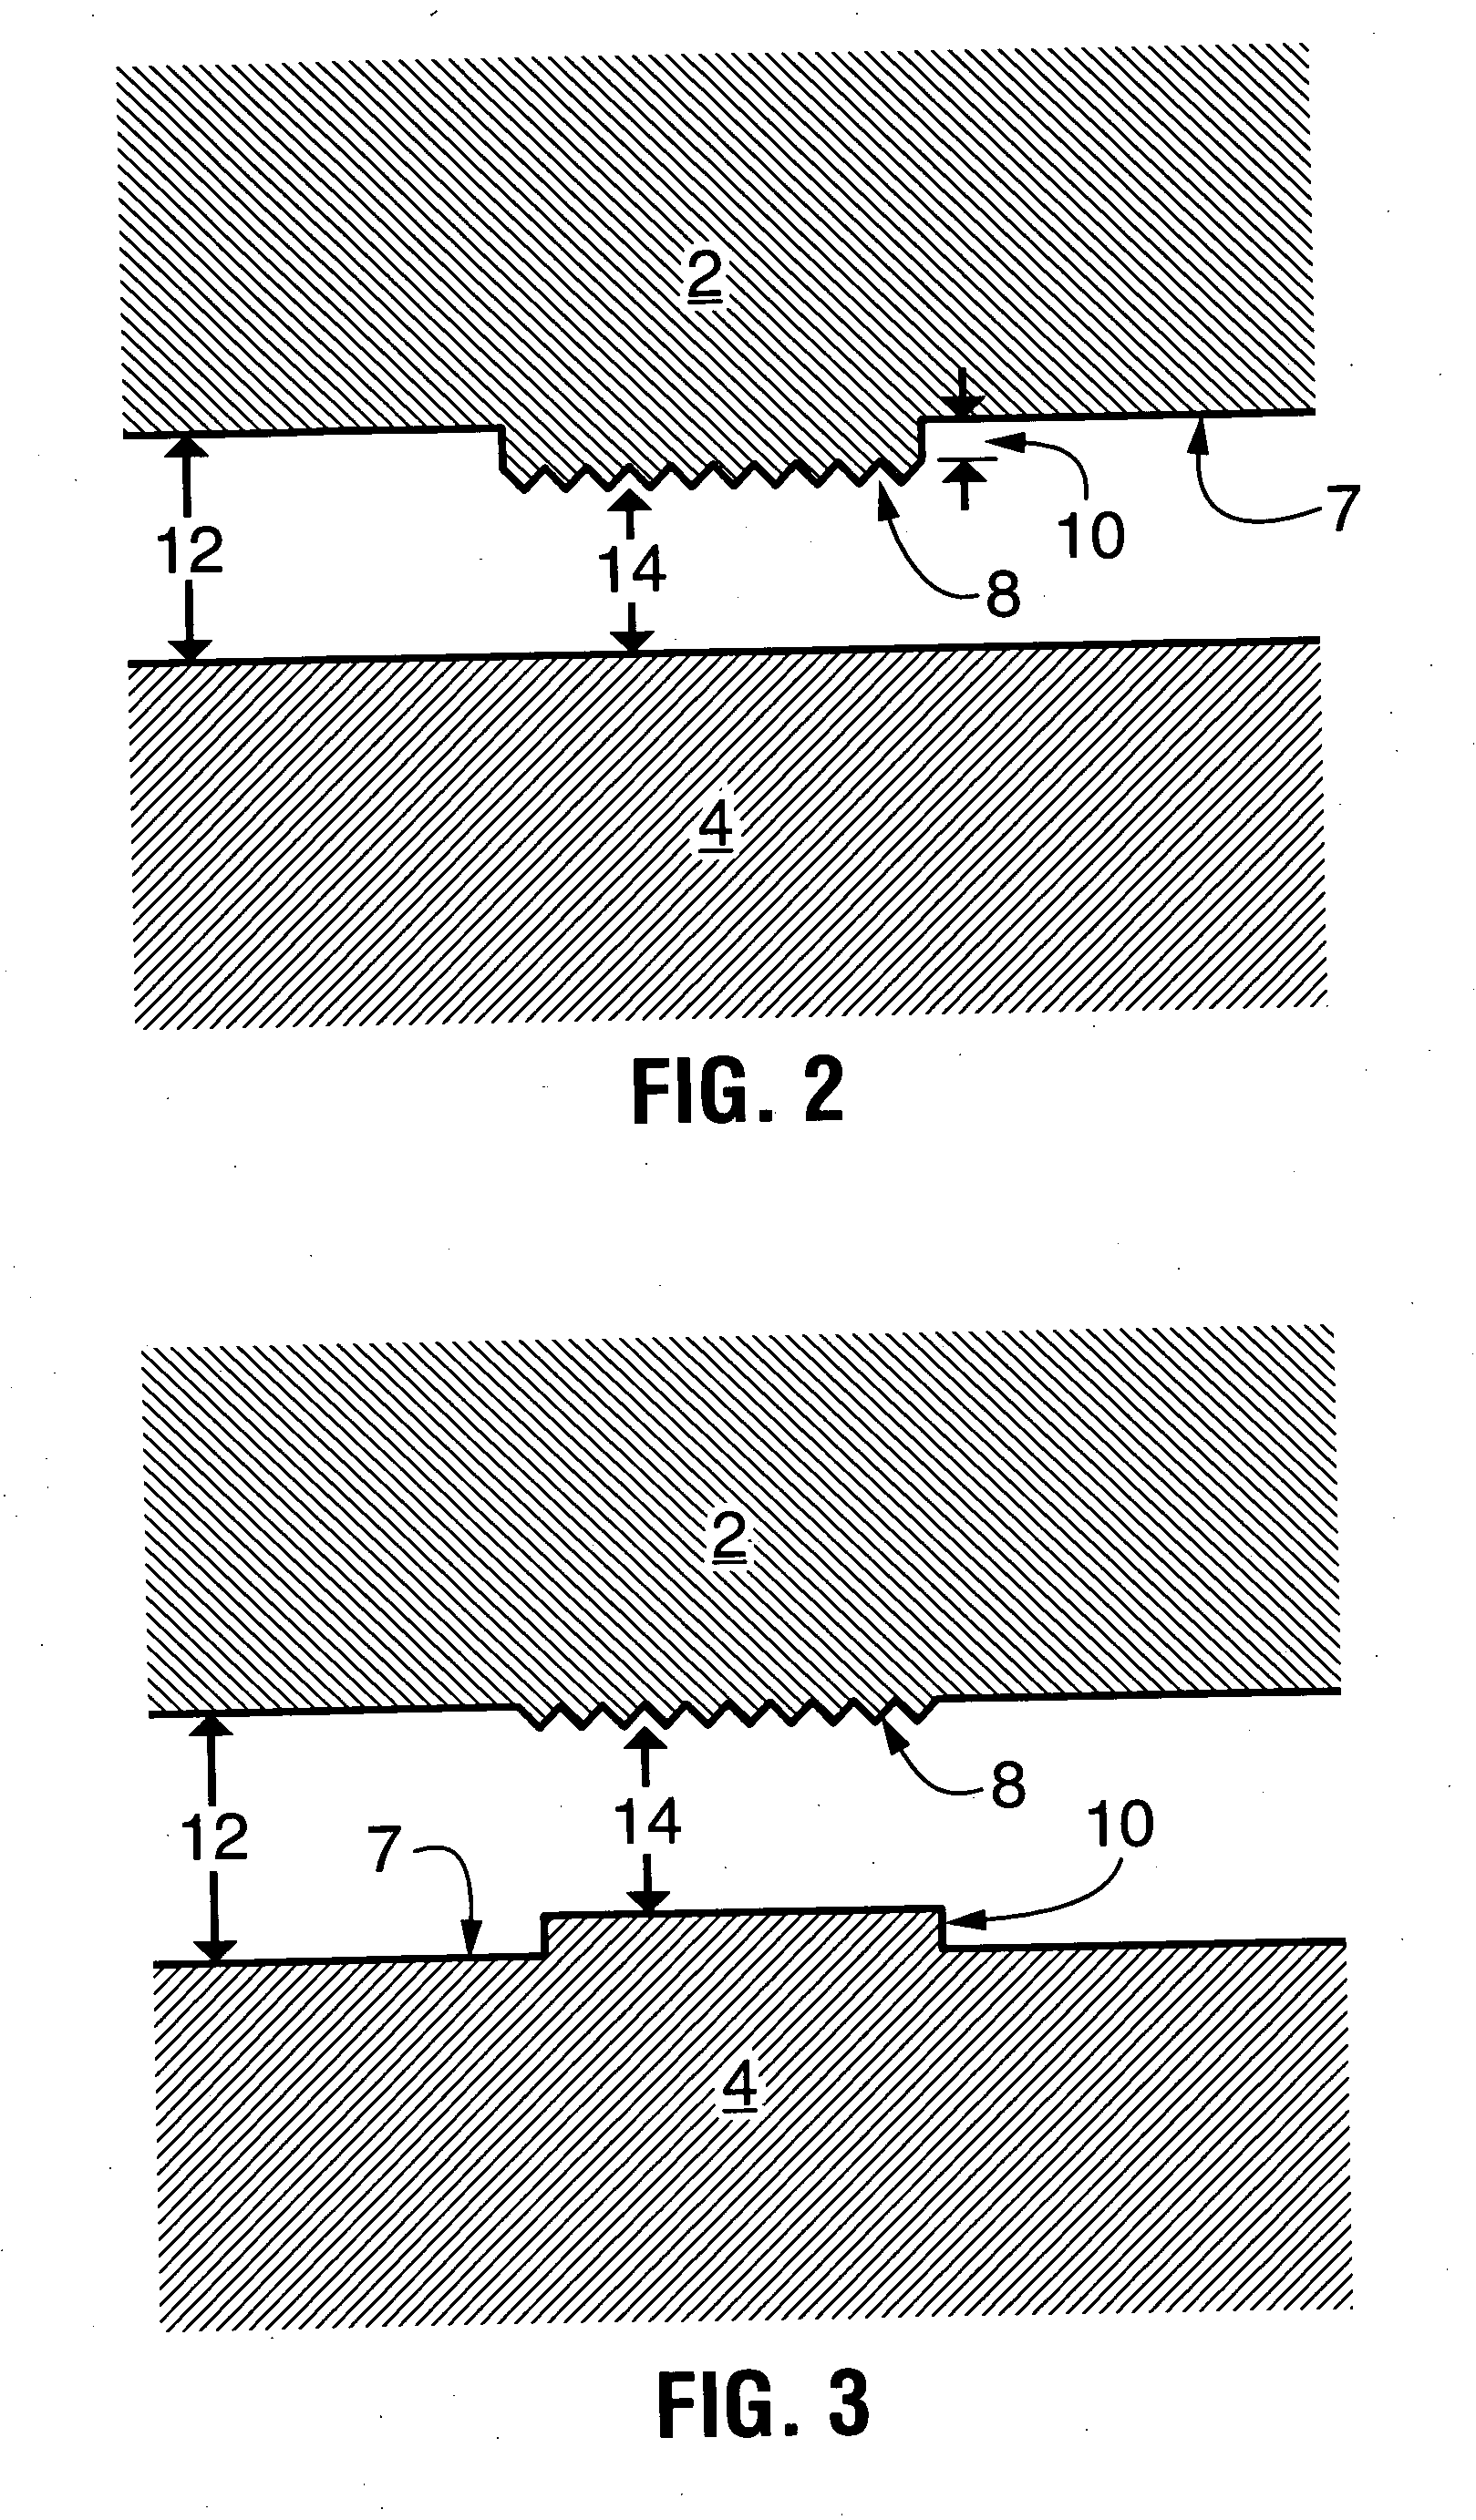 Roll embossing of discrete features